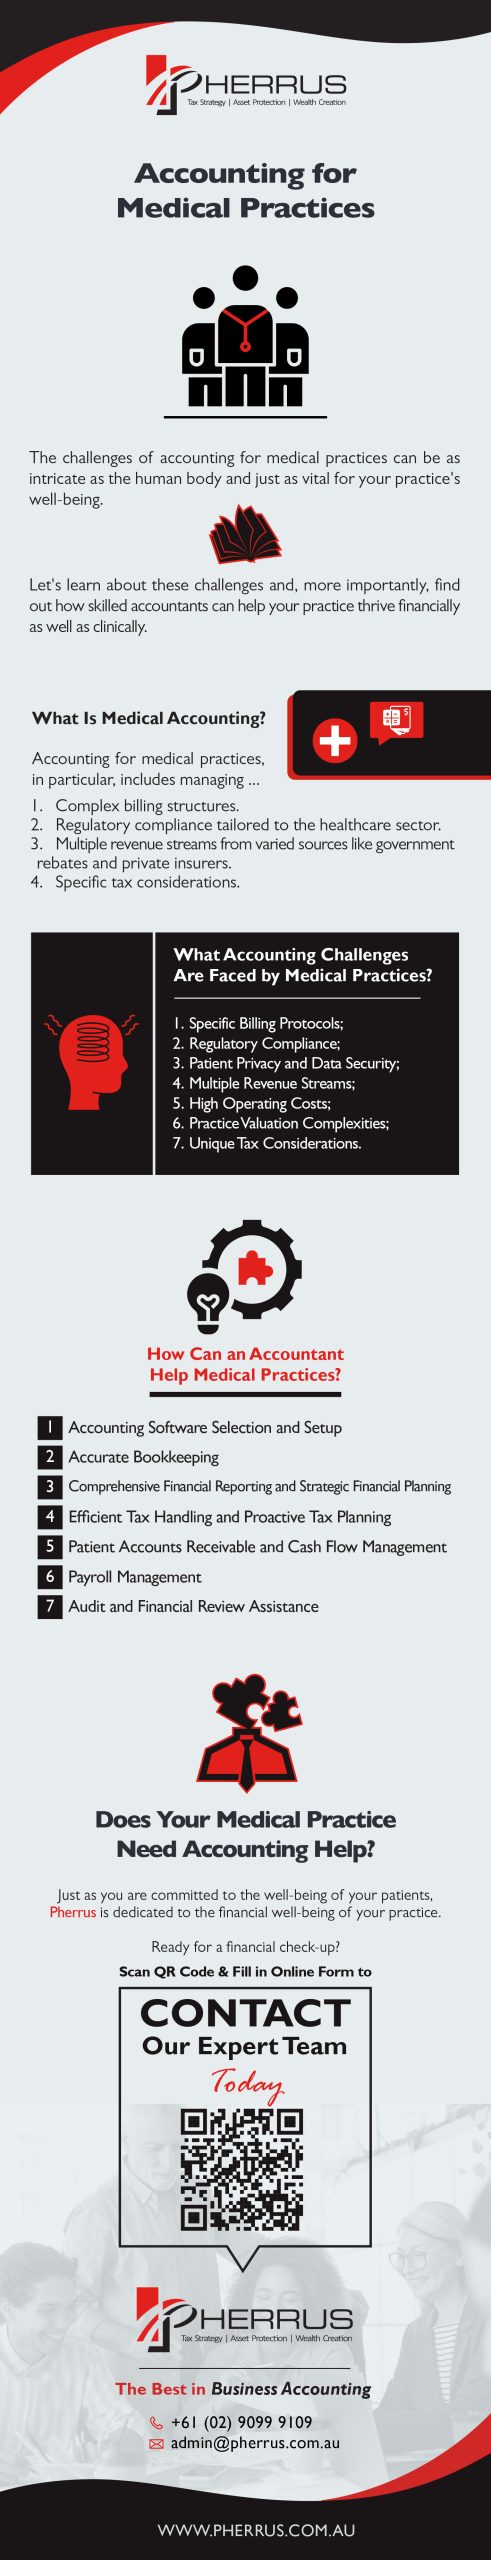 Accounting for Medical Practices Infographic